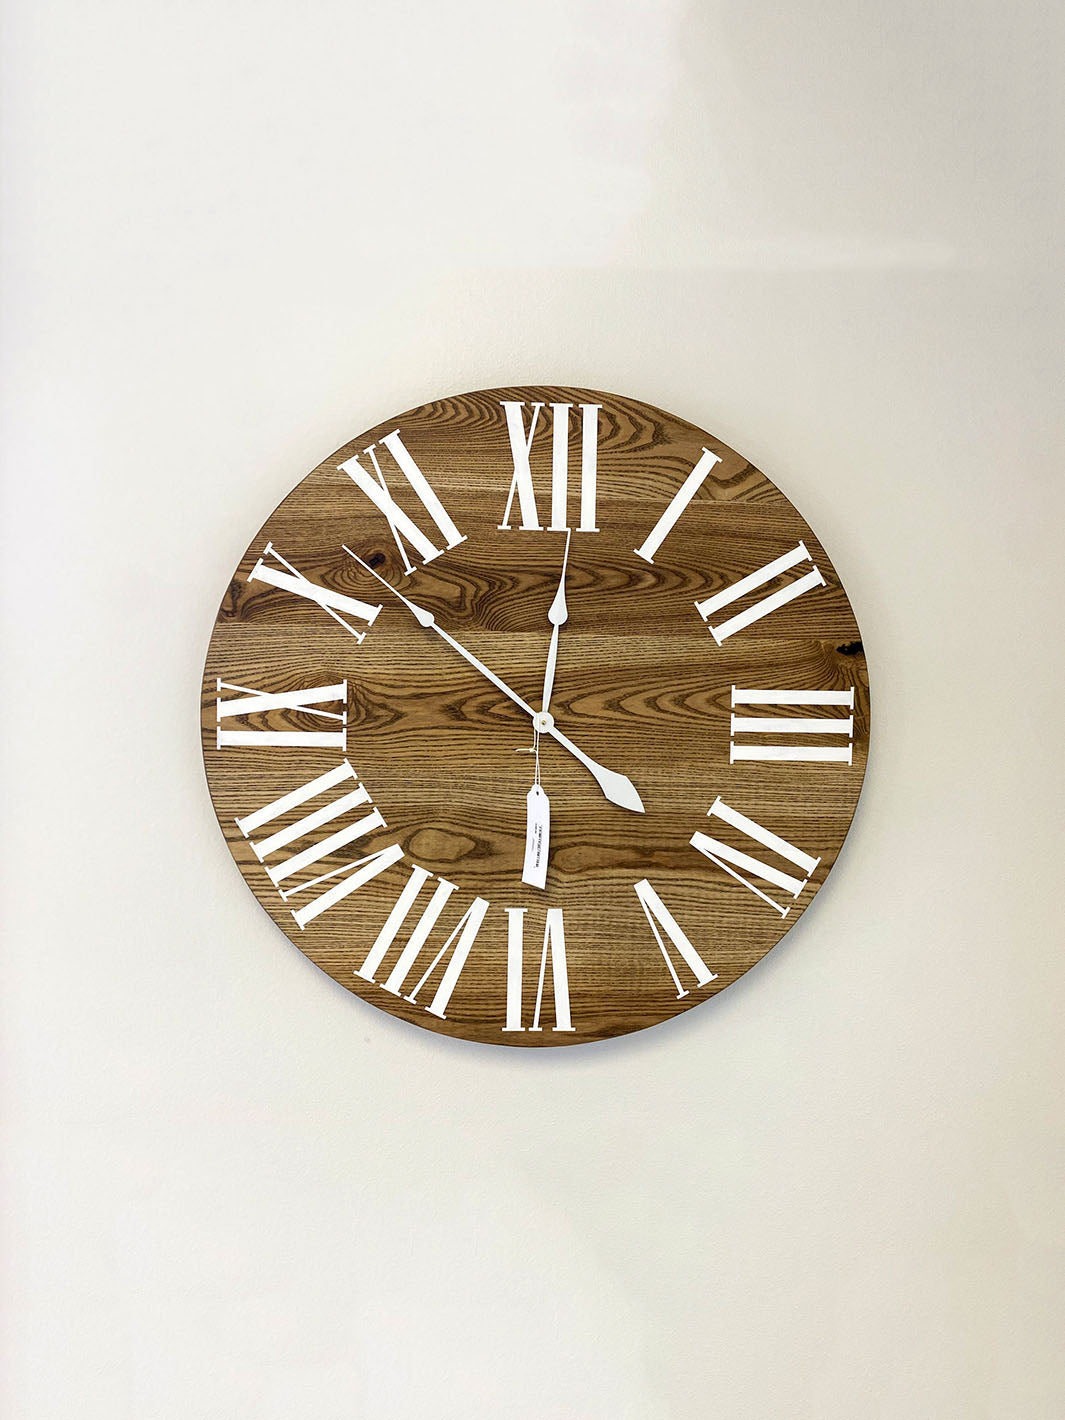 Dark Stained Solid Ash Wood Wall Clock with White Roman Numerals Earthly Comfort Clocks 2051-5